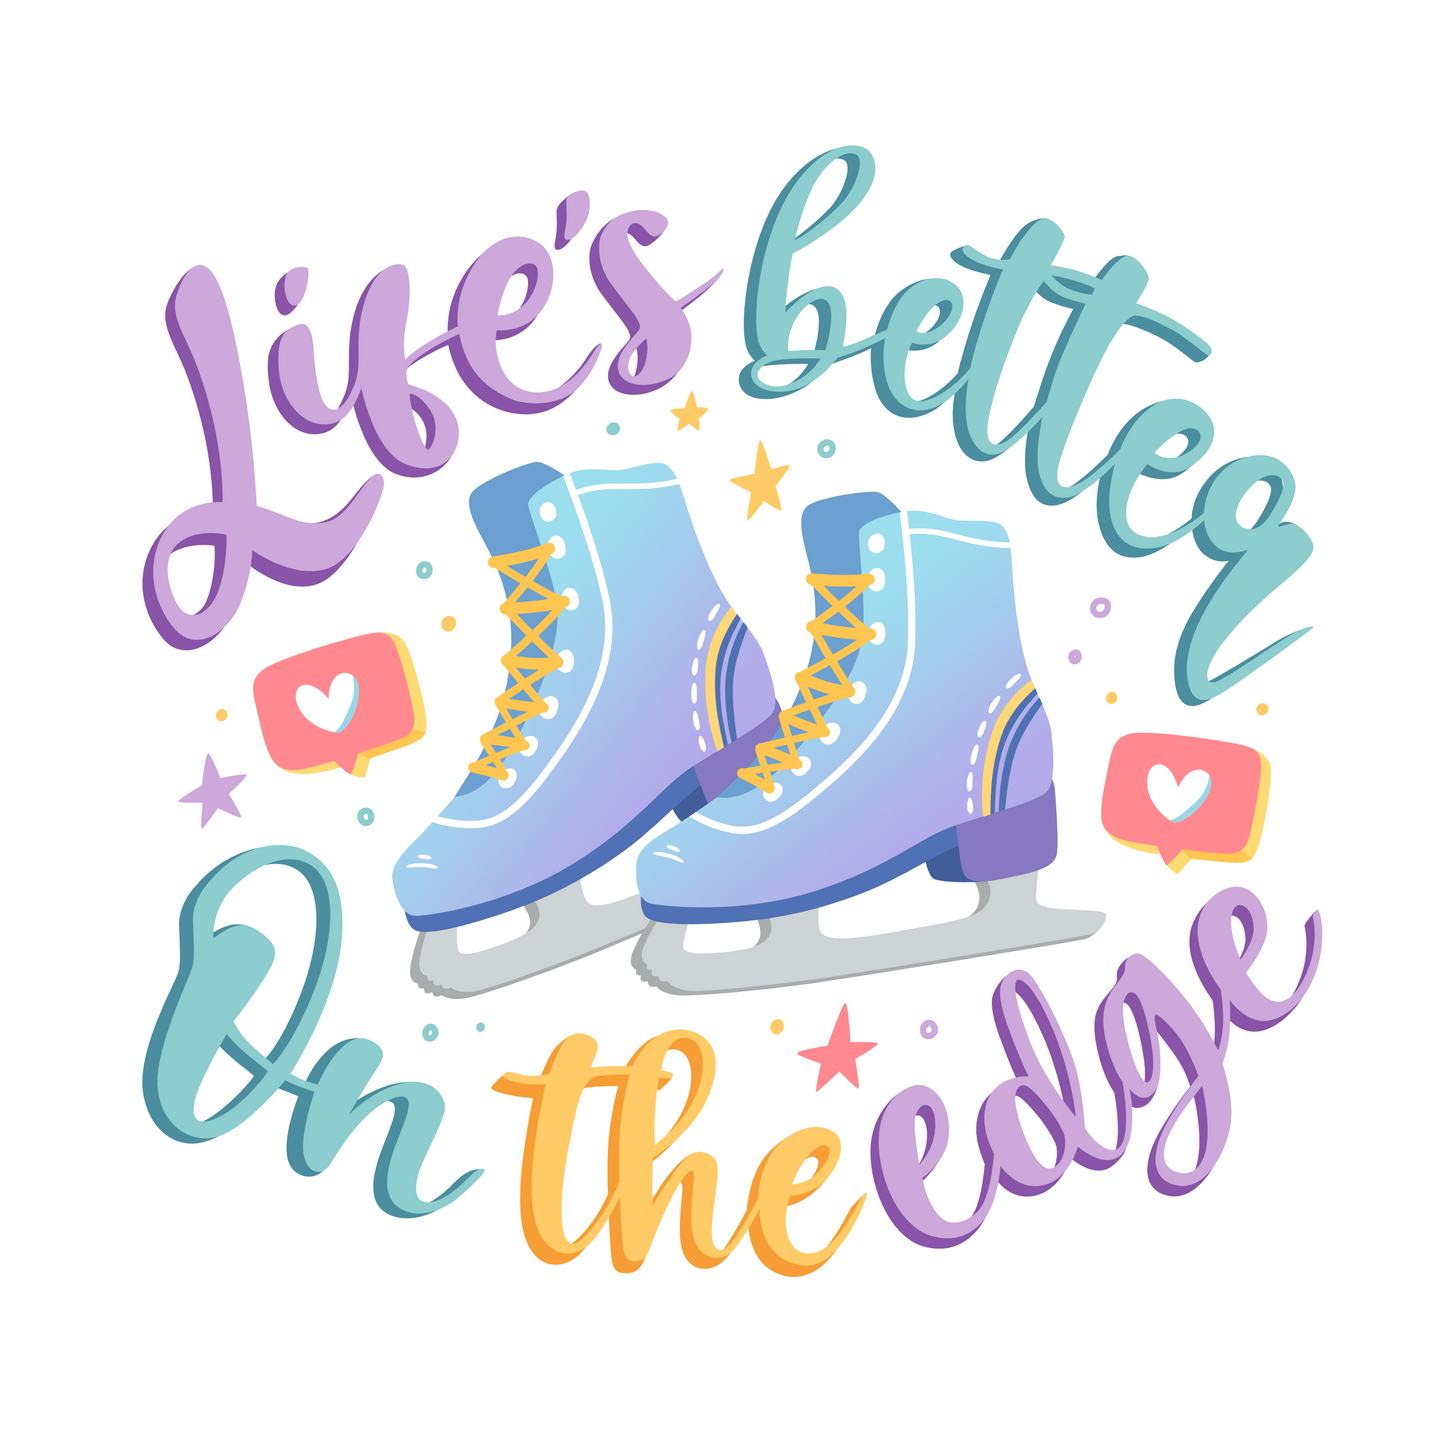 Life's Better On The Edge Figure Skating Sticker, 3" x 3"